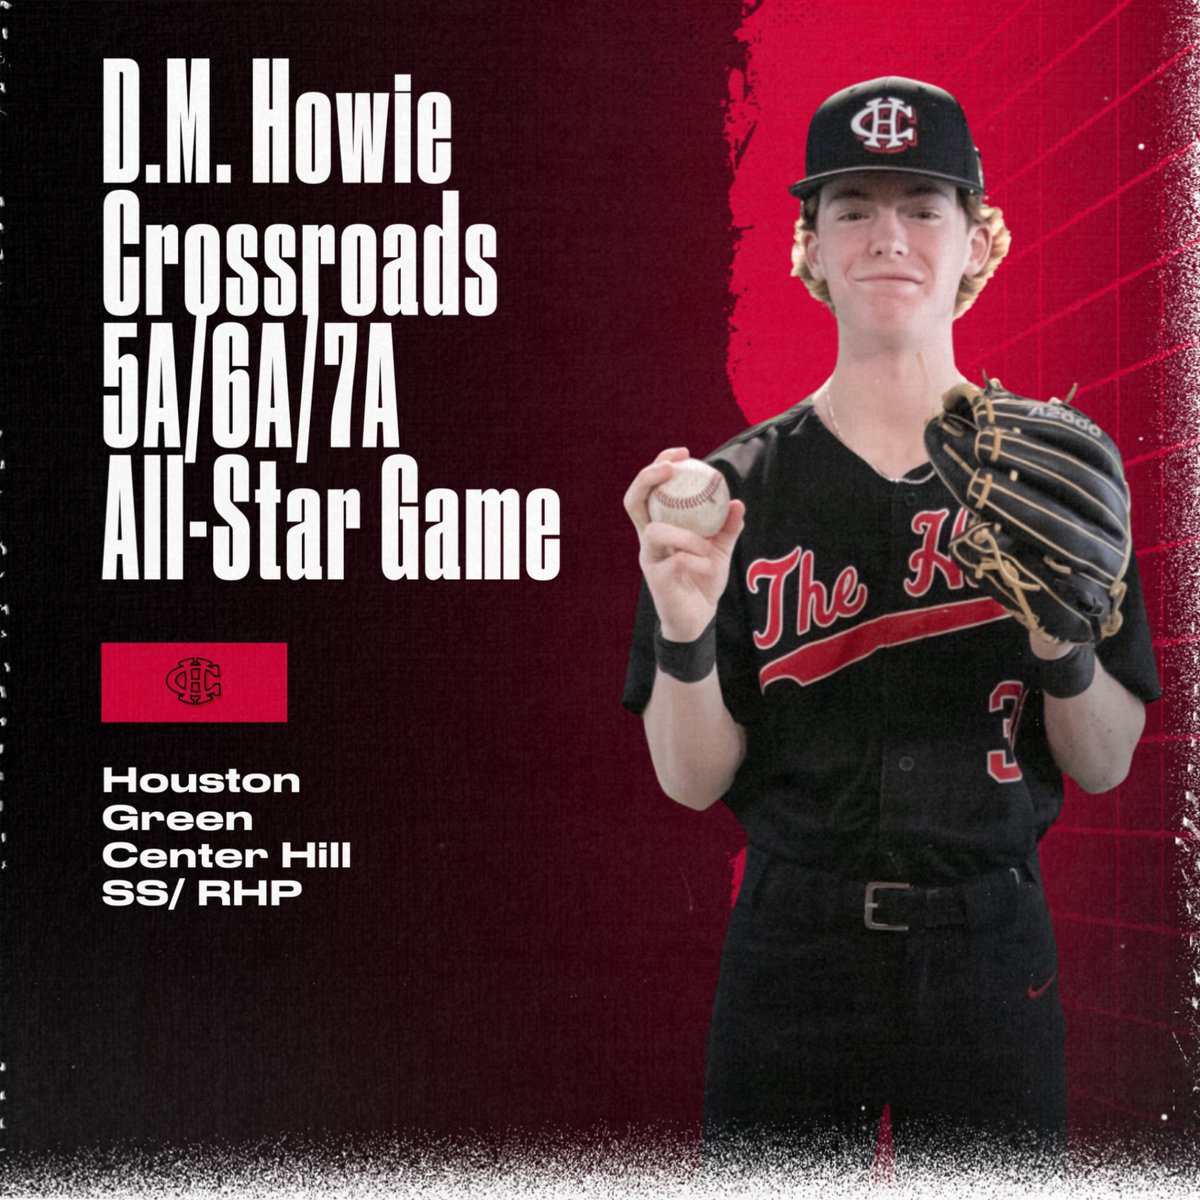 Congratulations @HoustonGreen3 on being selected to the Crossroads All Star game in Hattiesburg on May 28th!